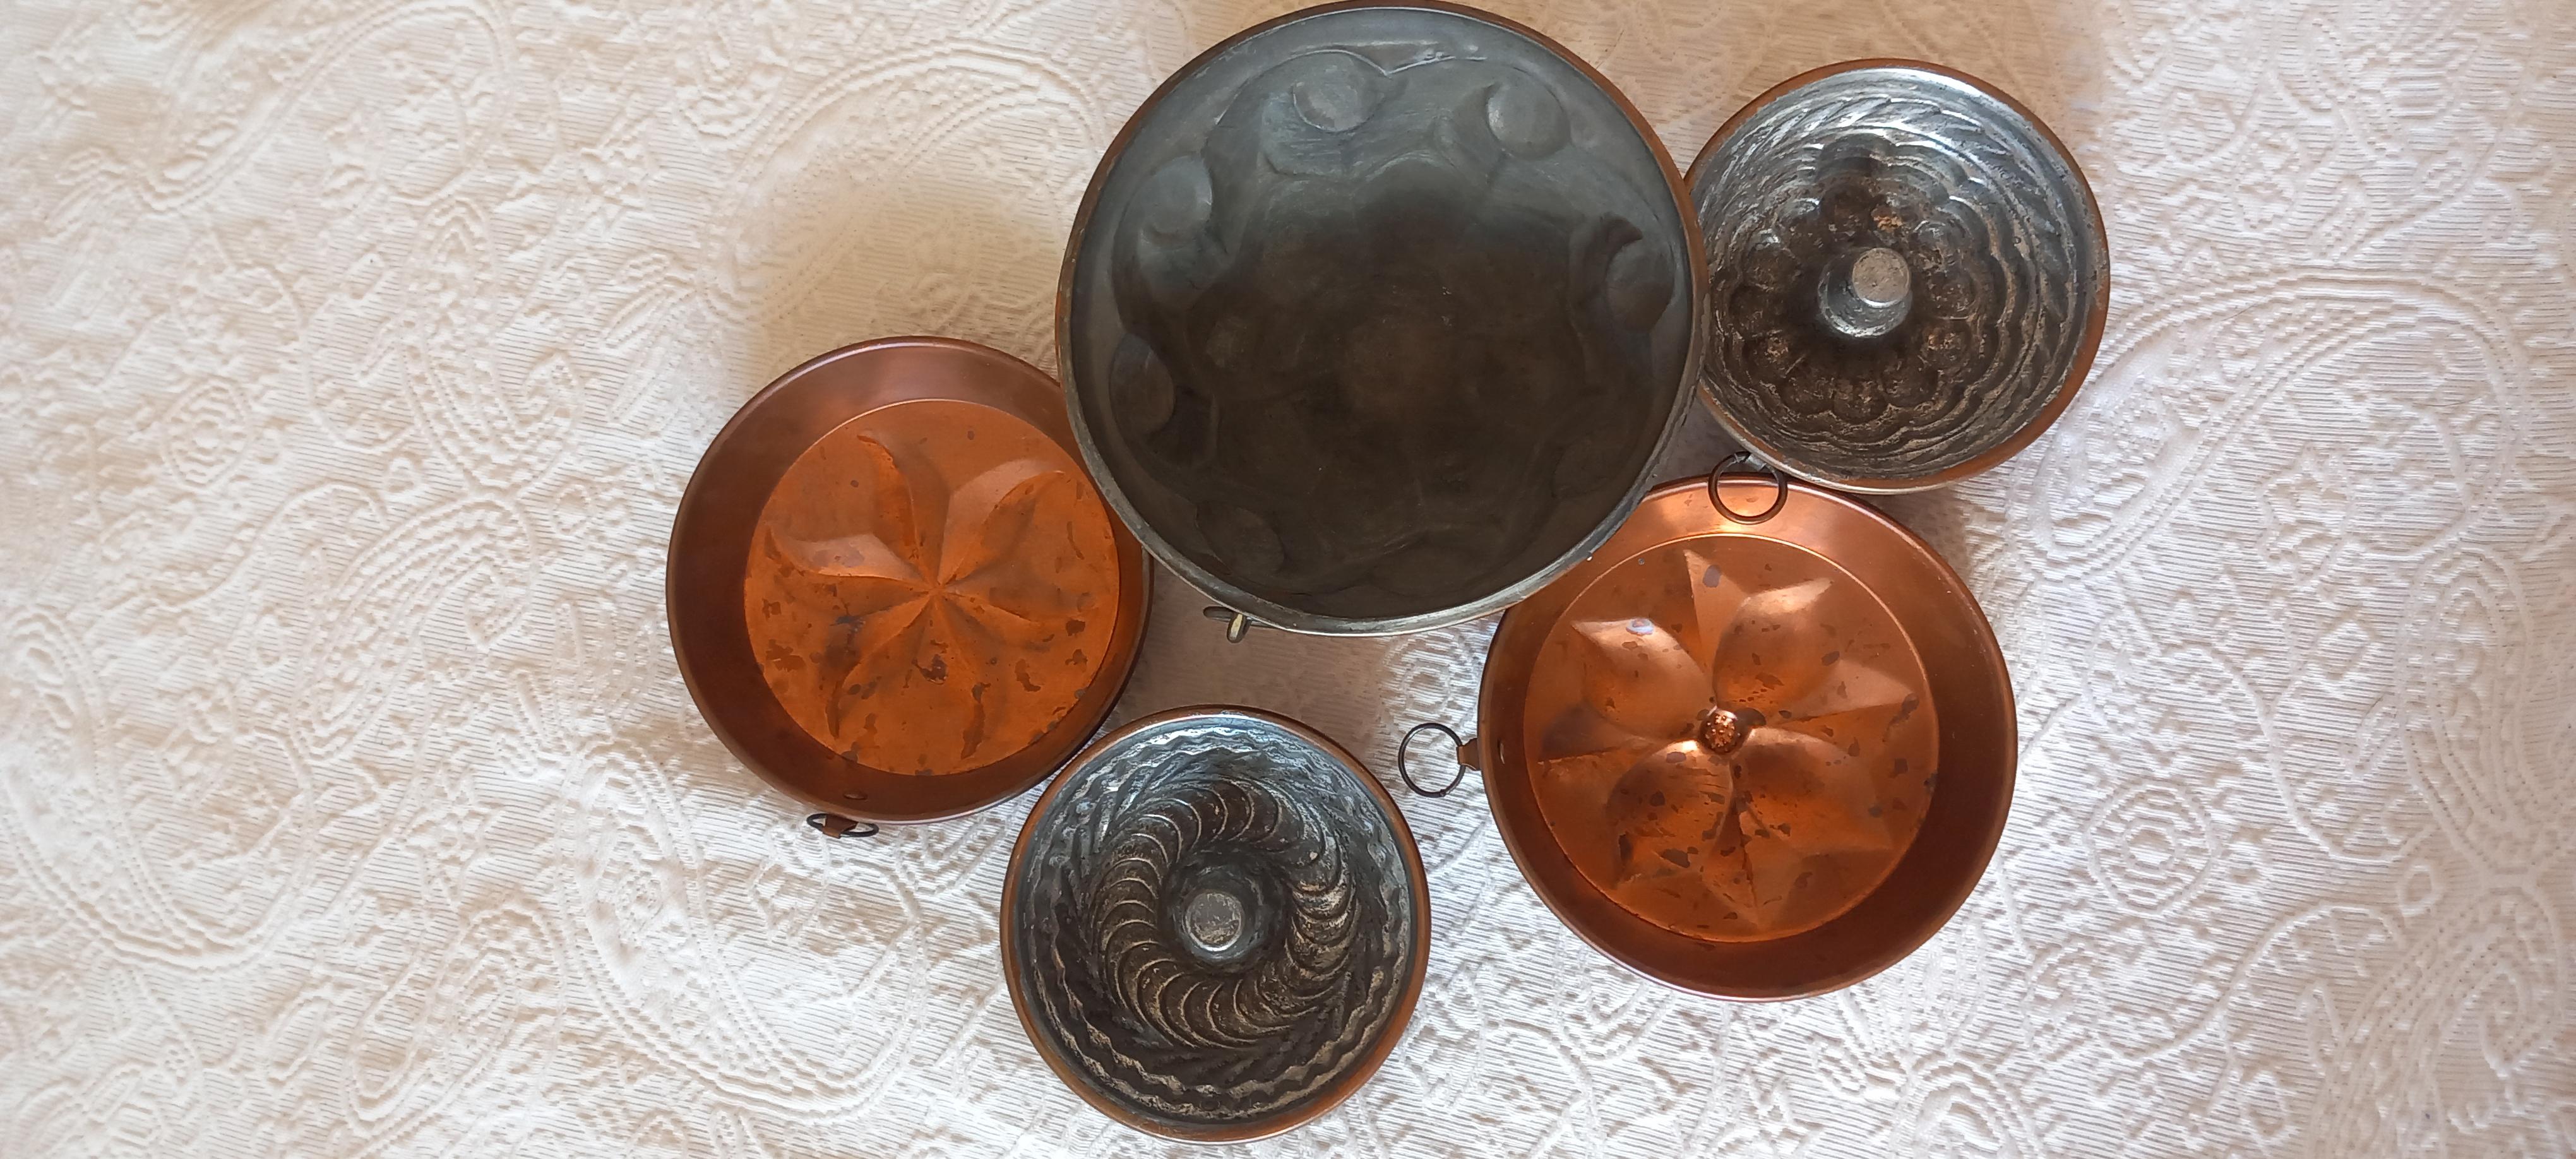 The price is for the lot of 5 molds

Ideal copper molds to hang as an ornament in a rustic kitchen.
Vintage copper molds with tin-plated interior

 copper molds kitchen; Wall decoration; brass; rustic. fall; pastry molds vintage old antiques lobster